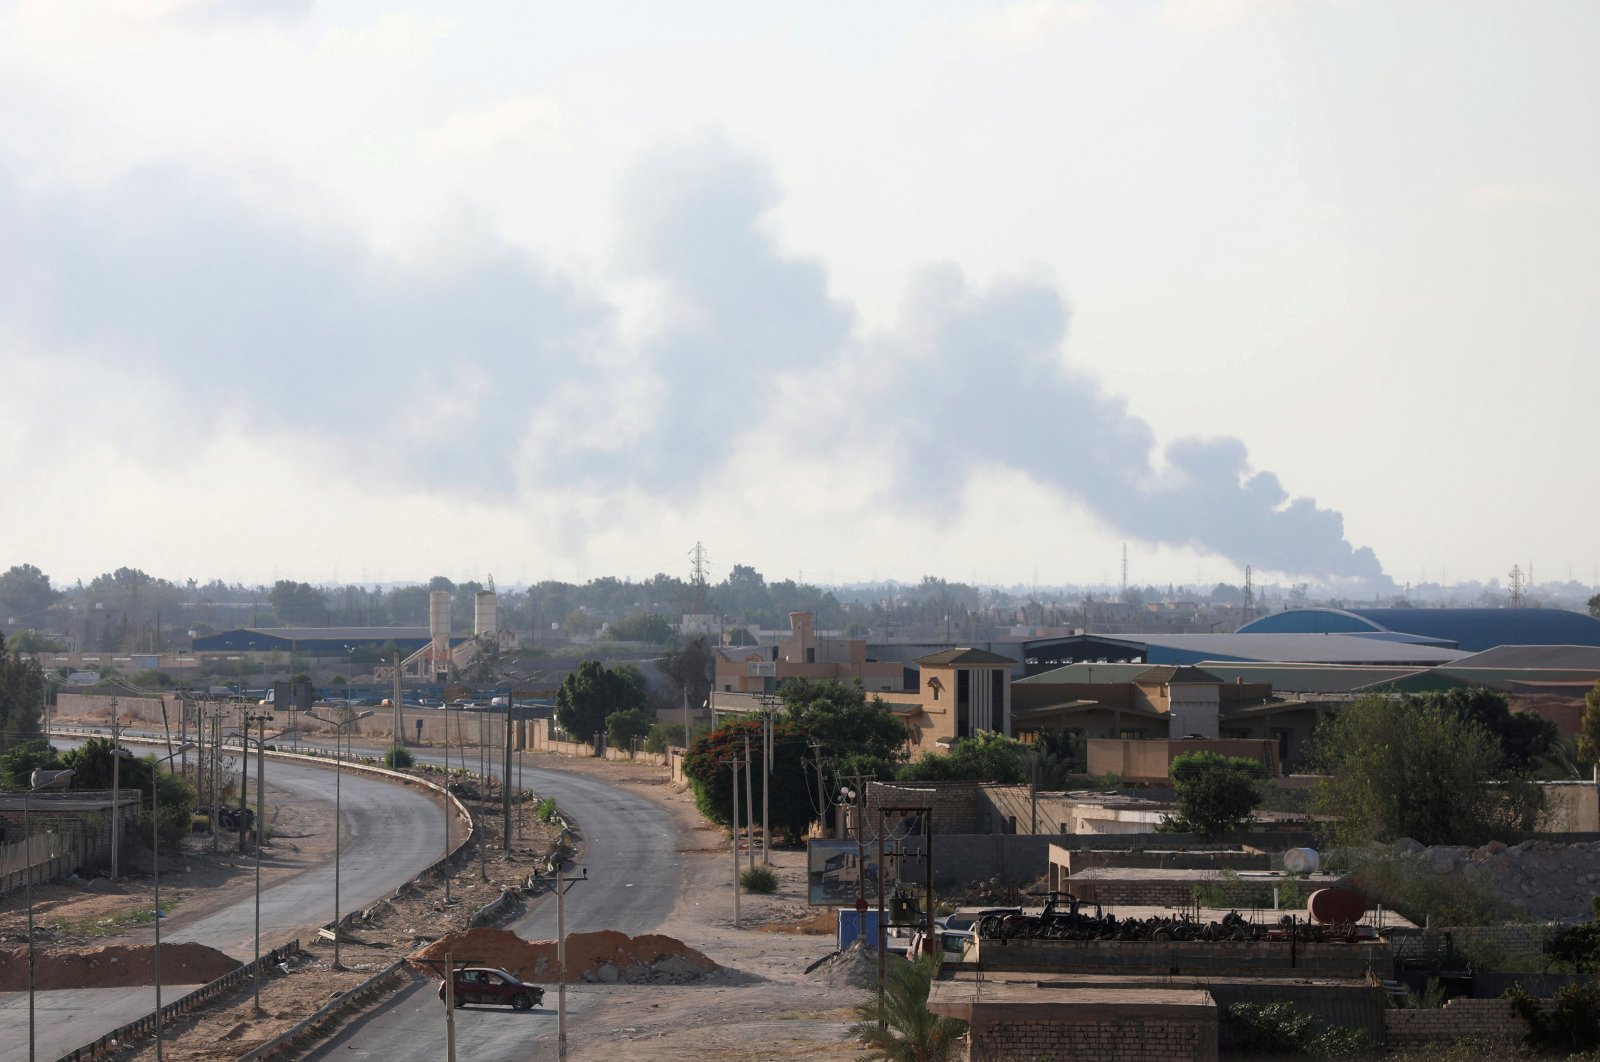 Smoke rises during clashes between forces allied to the internationally recognized government and armed groups in Tripoli, Libya, Sept. 22, 2018. (REUTERS Photo)